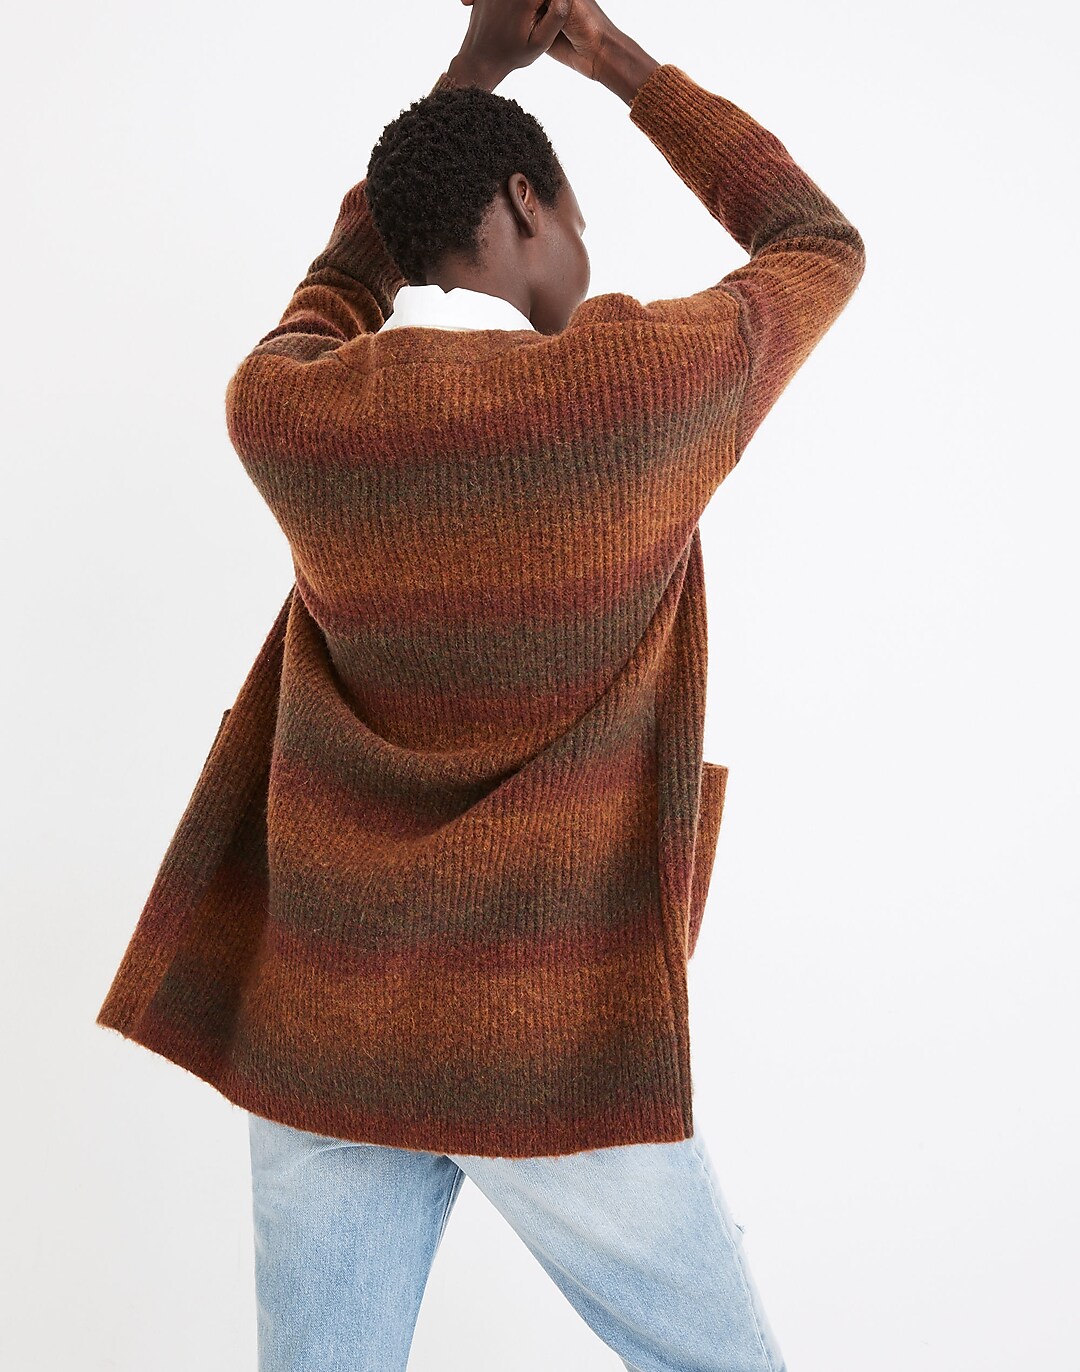 Space-Dyed Maysfield Cardigan Sweater